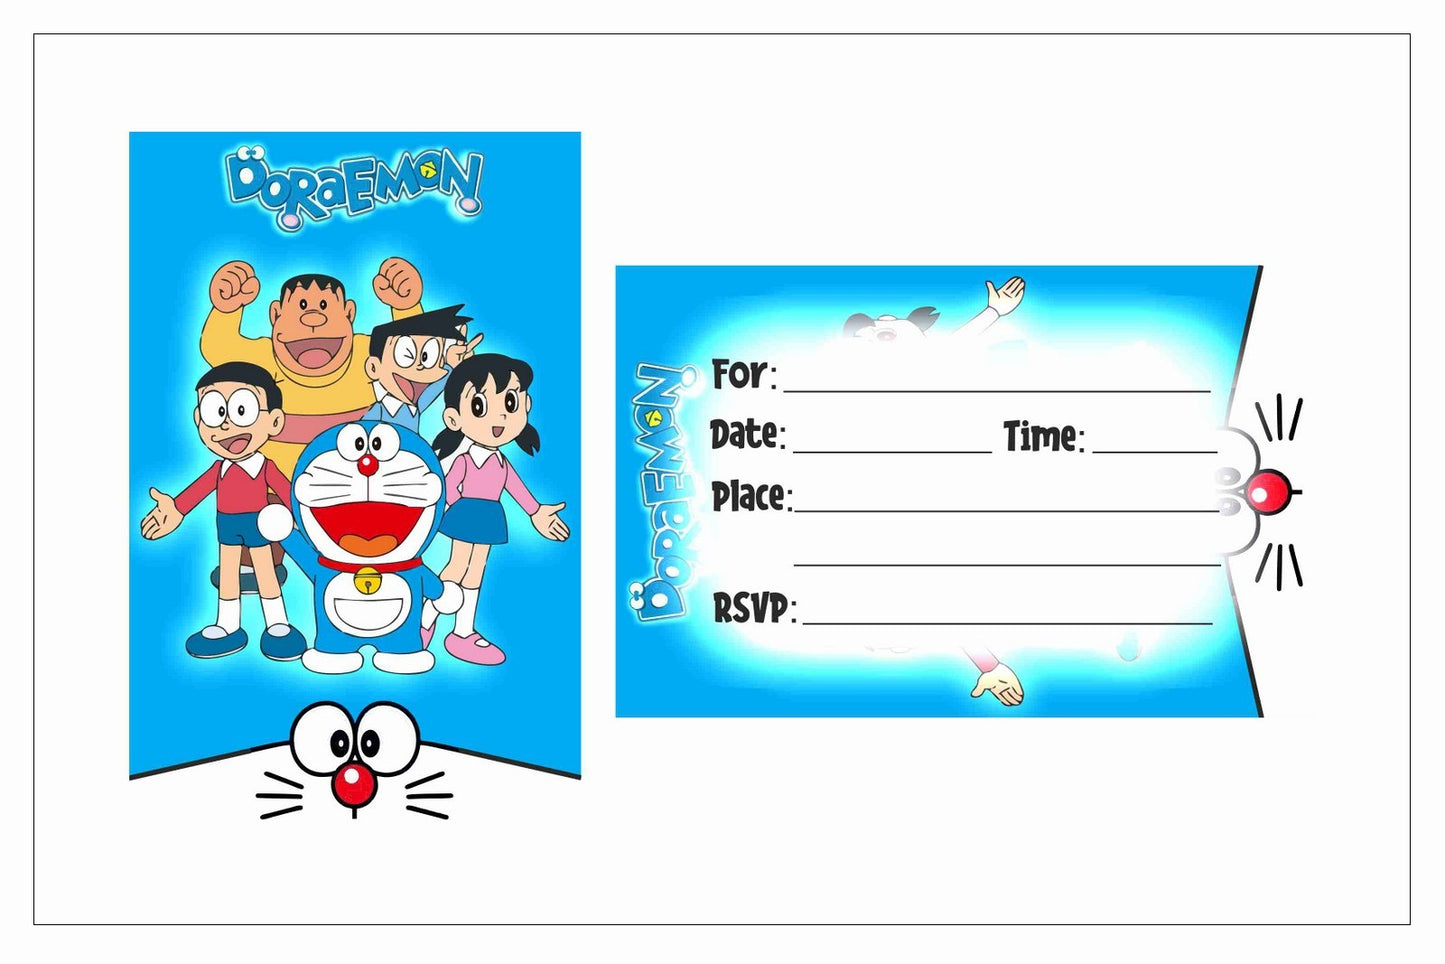 Doremon Theme Children's Birthday Party Invitations Cards with Envelopes - Kids Birthday Party Invitations for Boys or Girls,- Invitation Cards (Pack of 10)